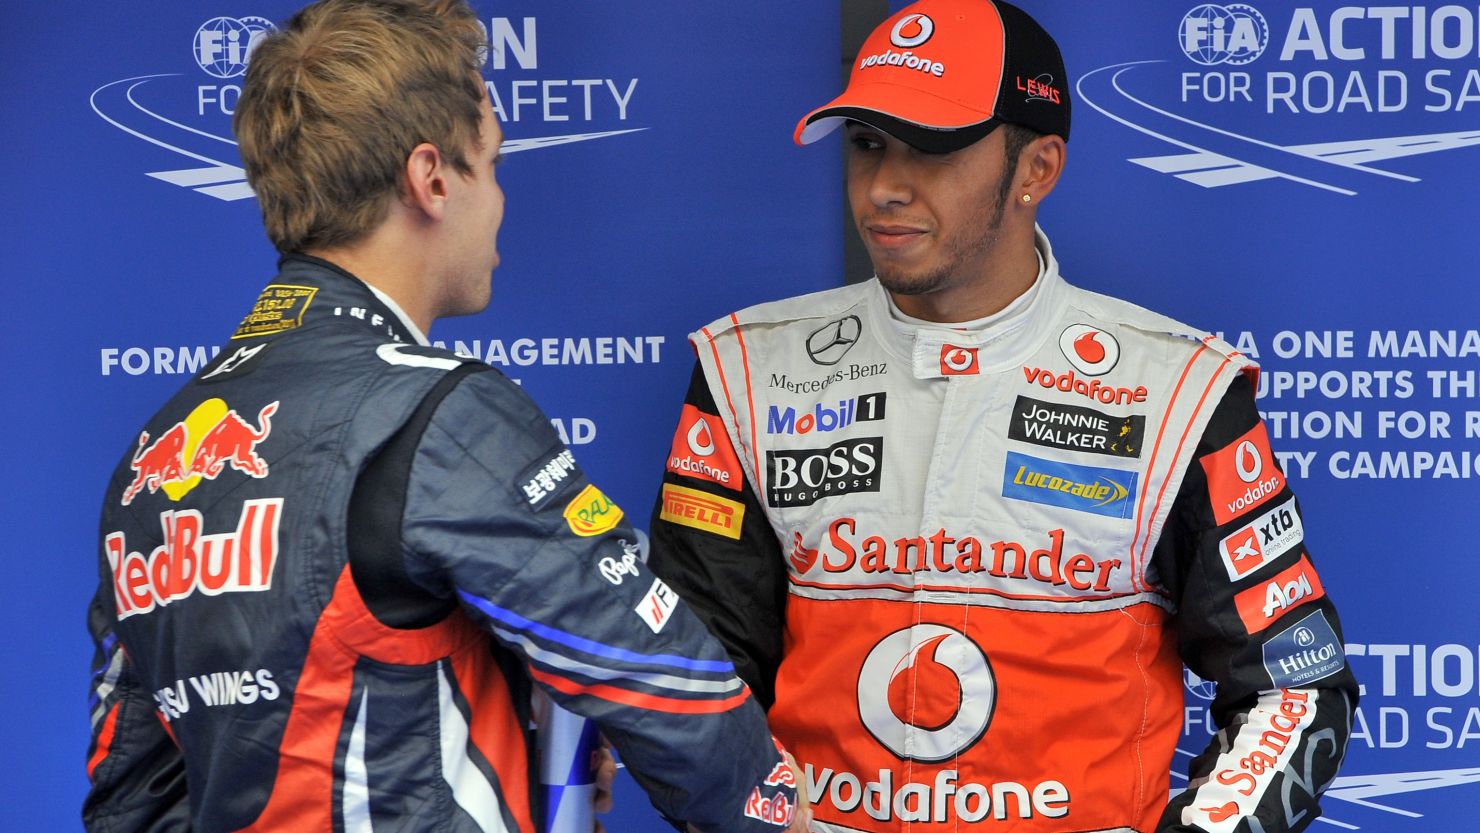 Lewis Hamilton is congratulated by Sebastian Vettel after claiming pole position in Korea.